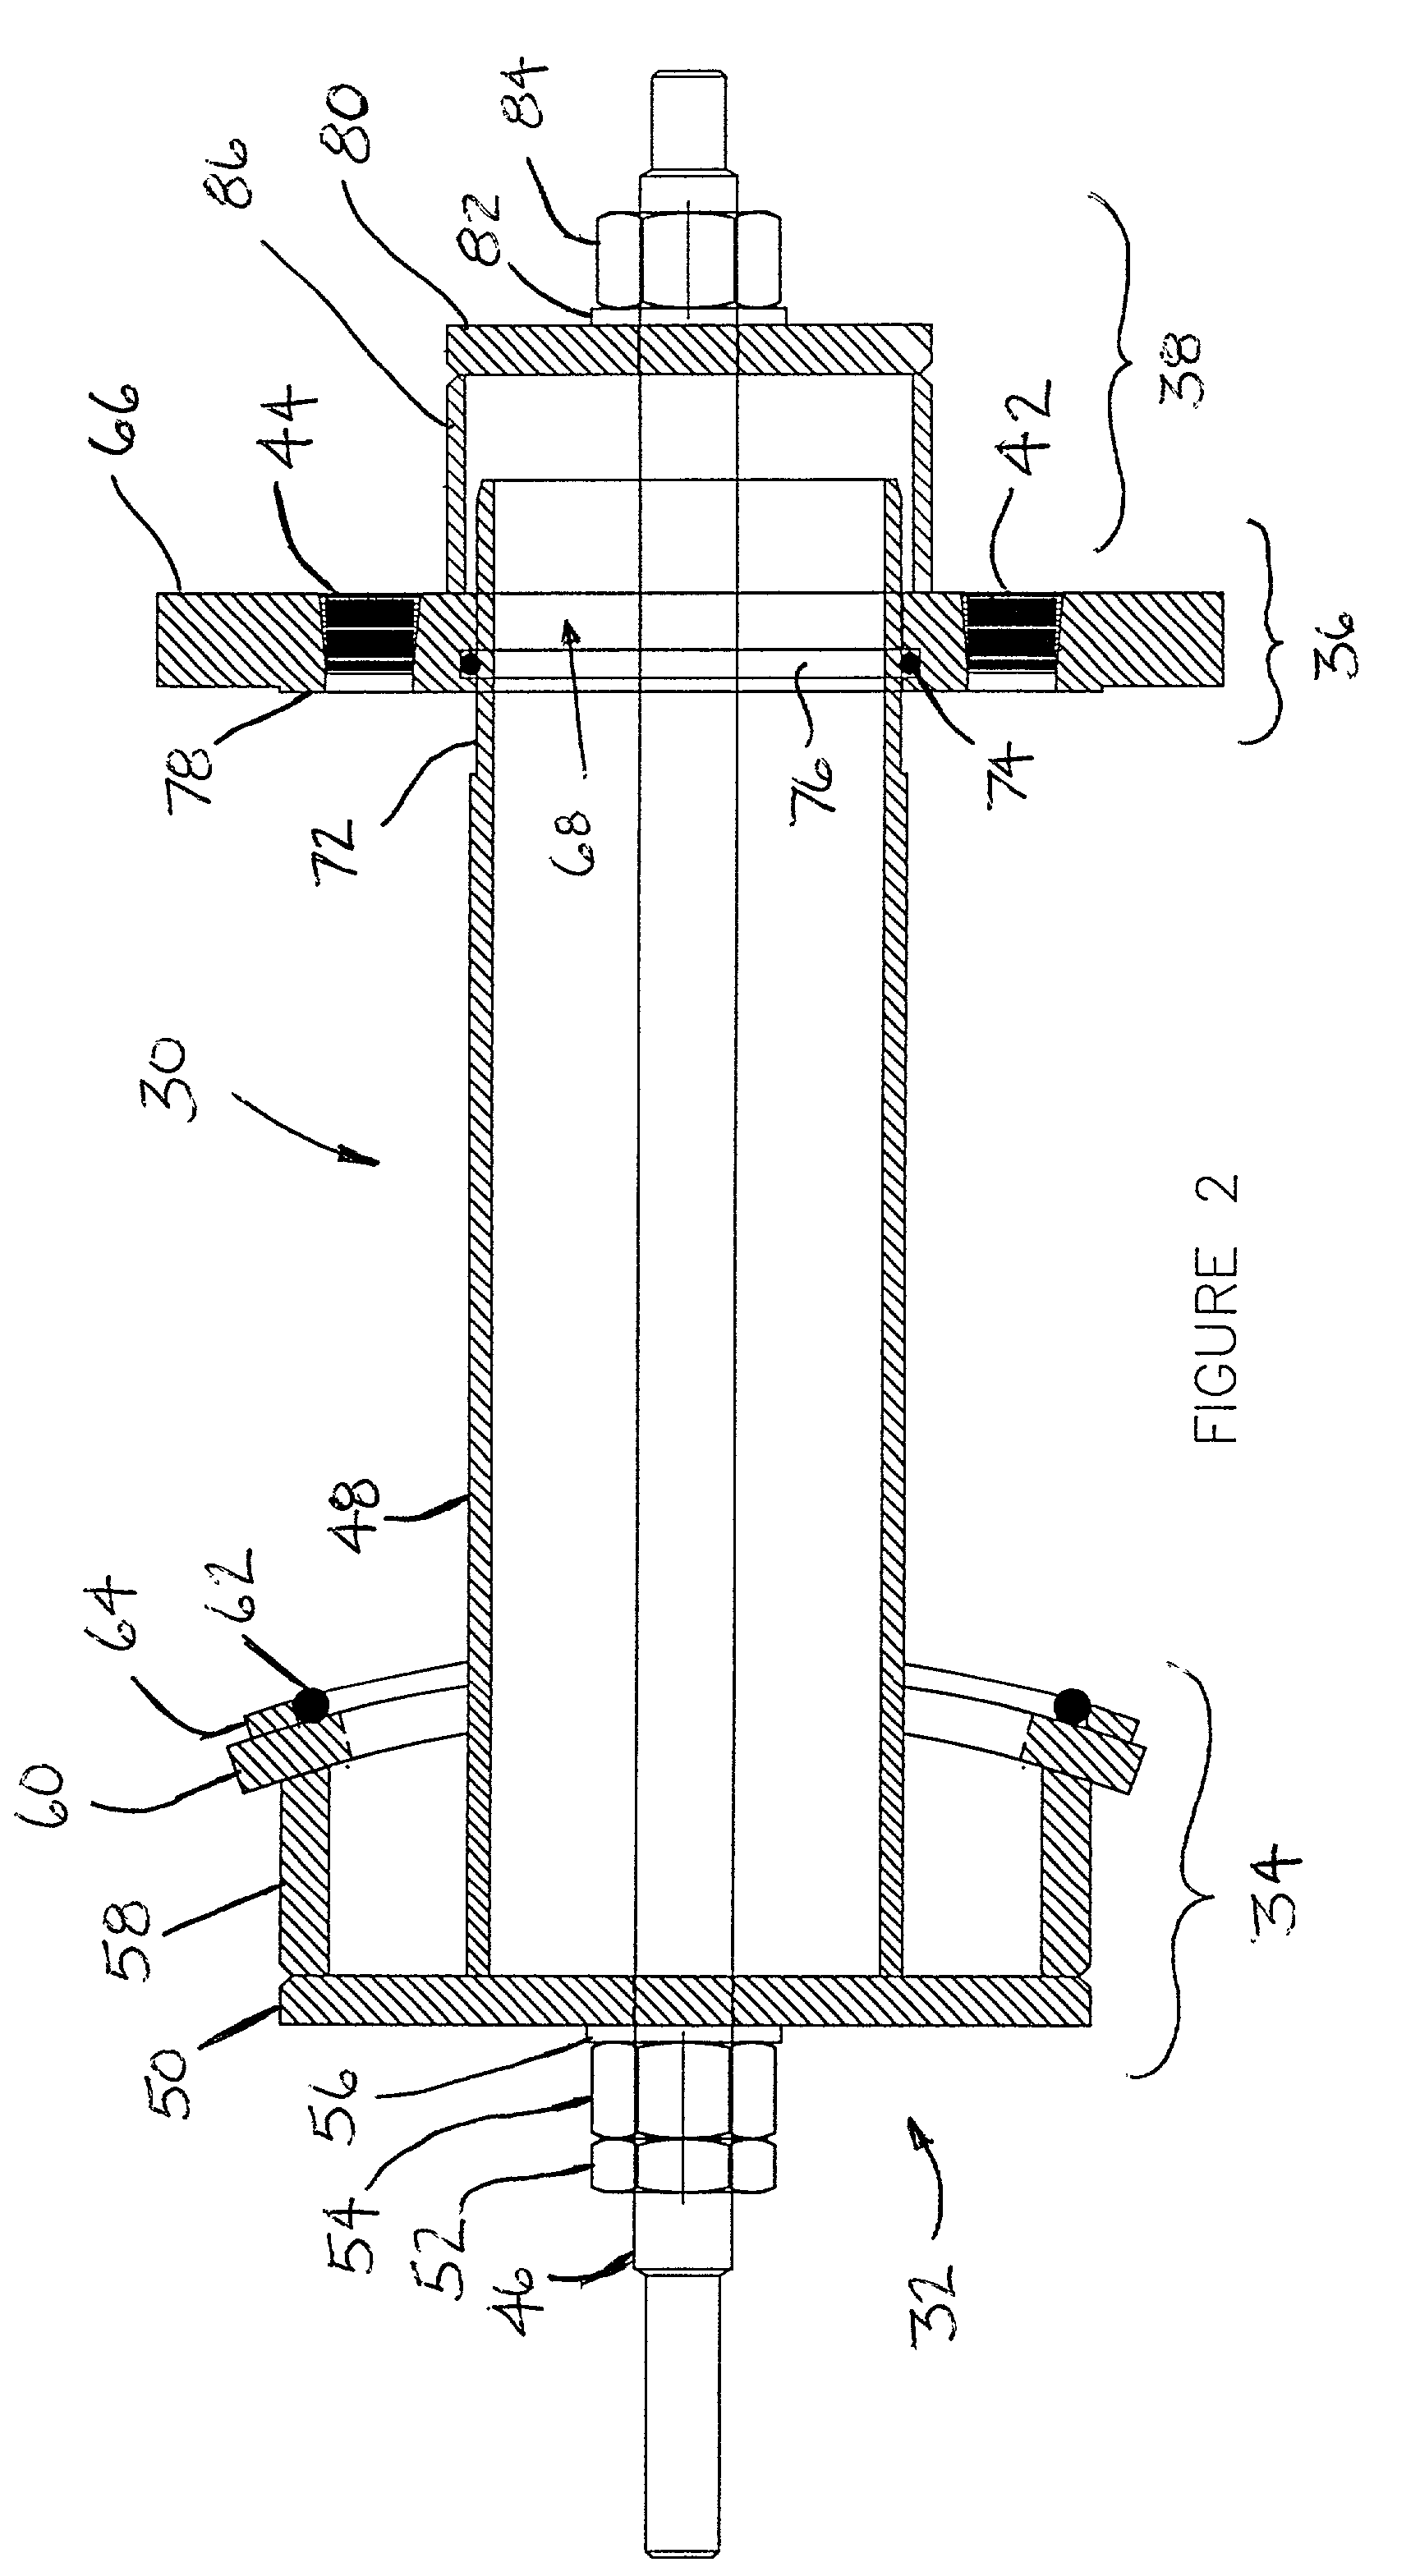 Branch pipe/tank nozzle test plug and method of use